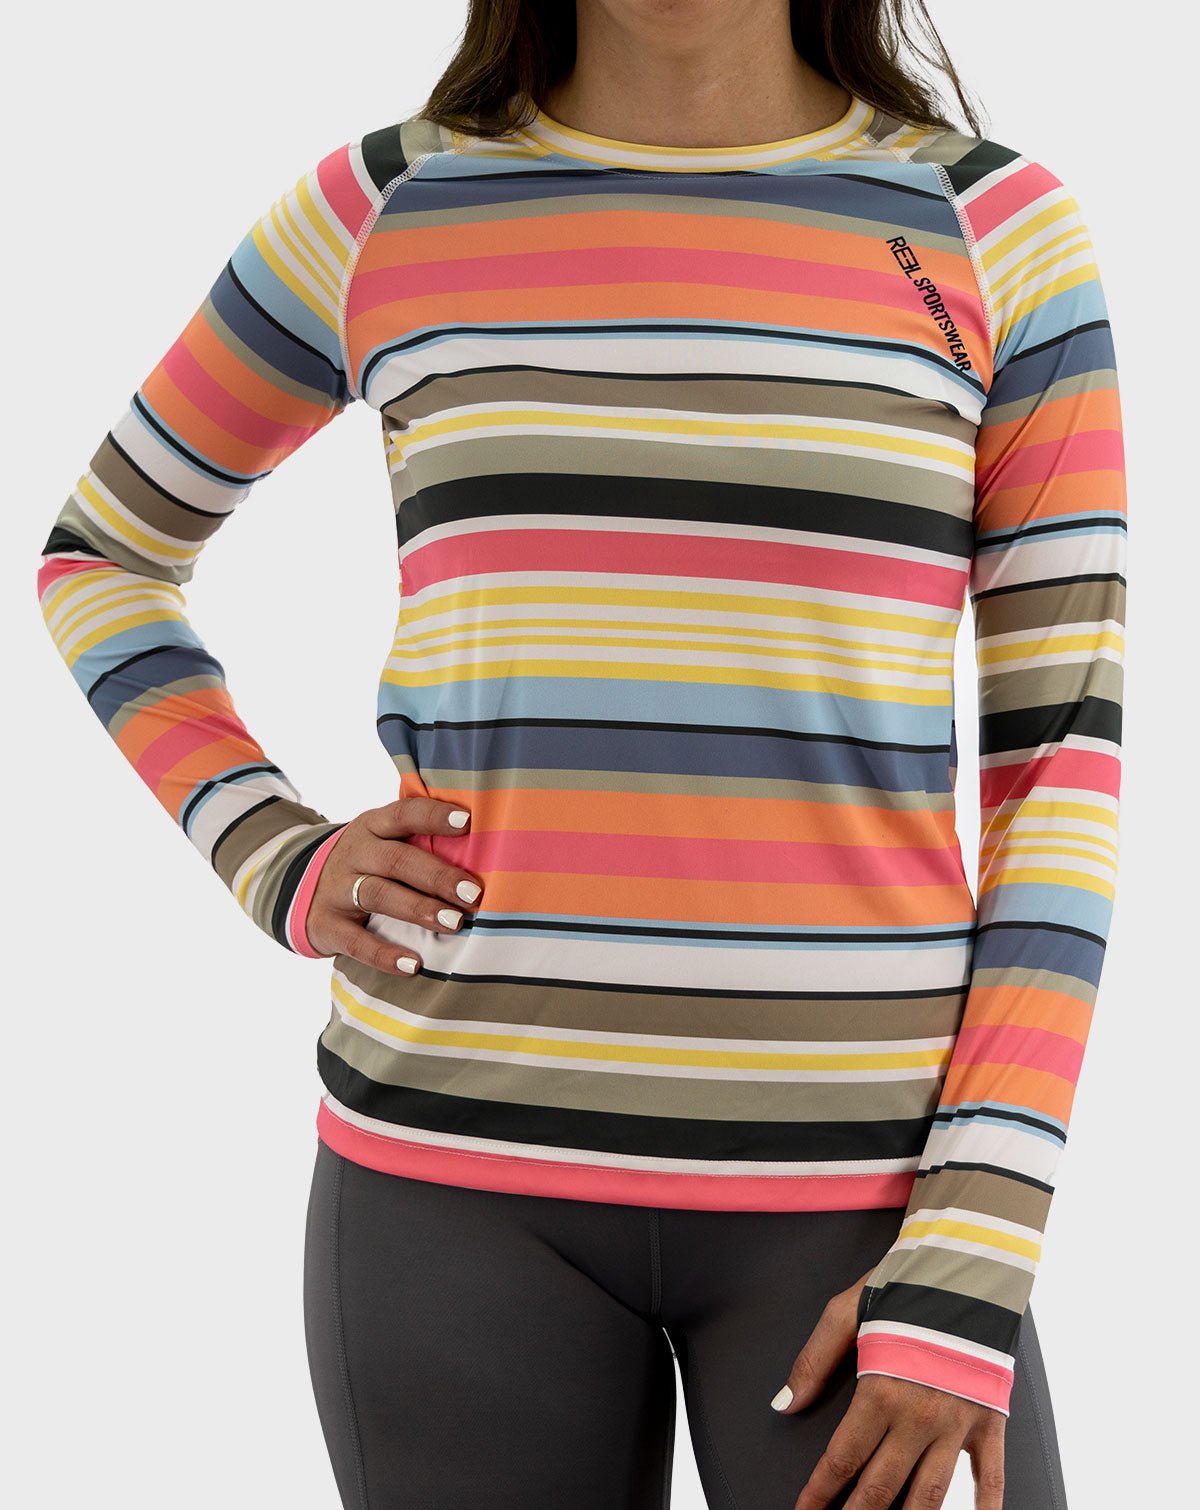 Women's Performance Long Sleeve - Scoop – Cleveland Fishing Co.